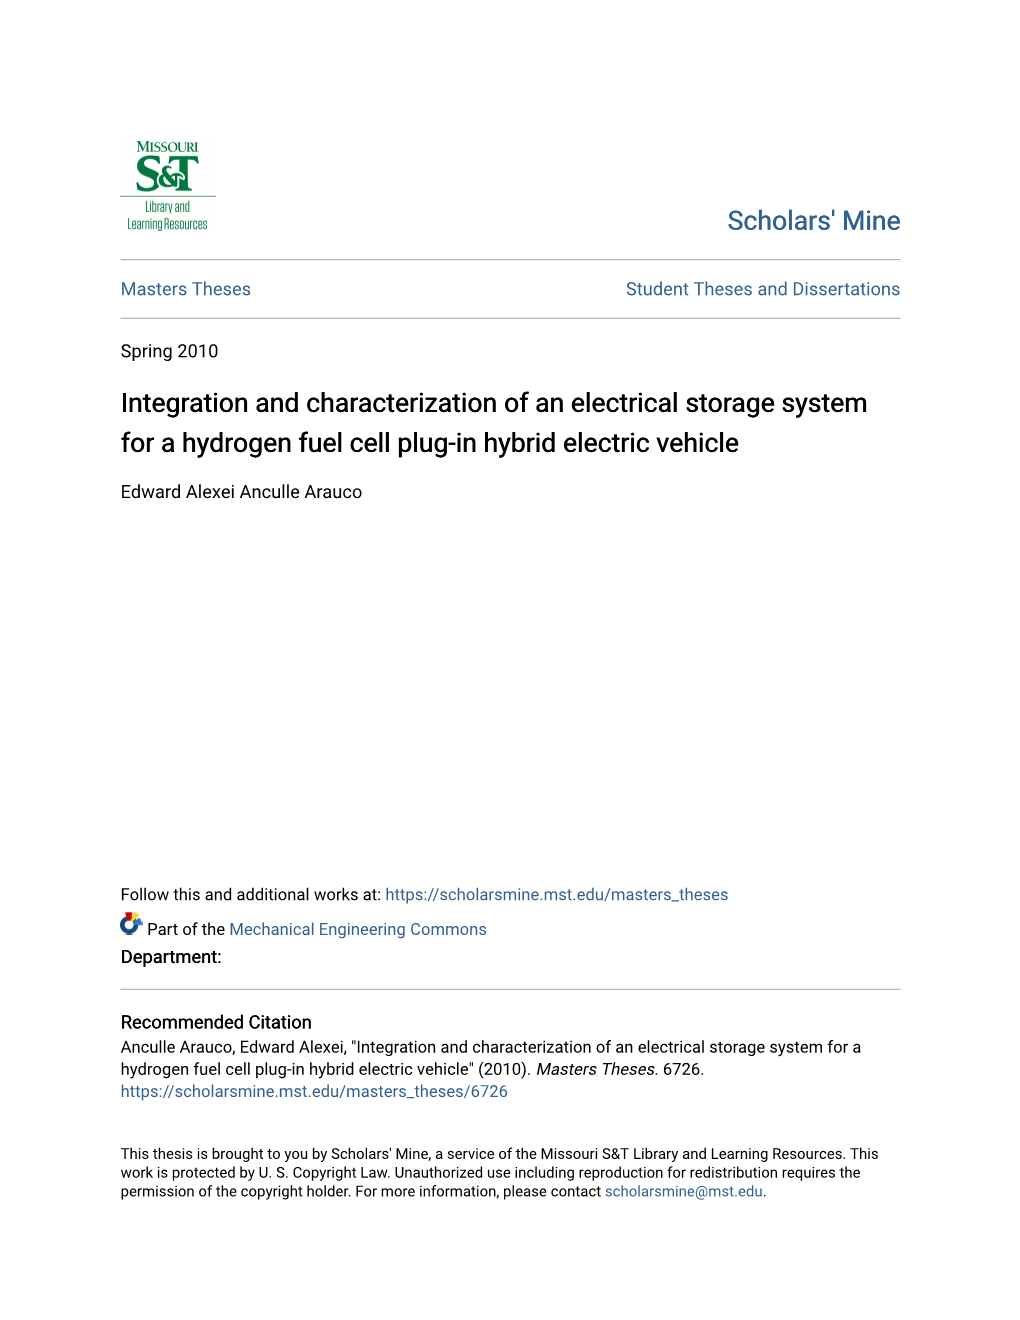 Integration and Characterization of an Electrical Storage System for a Hydrogen Fuel Cell Plug-In Hybrid Electric Vehicle